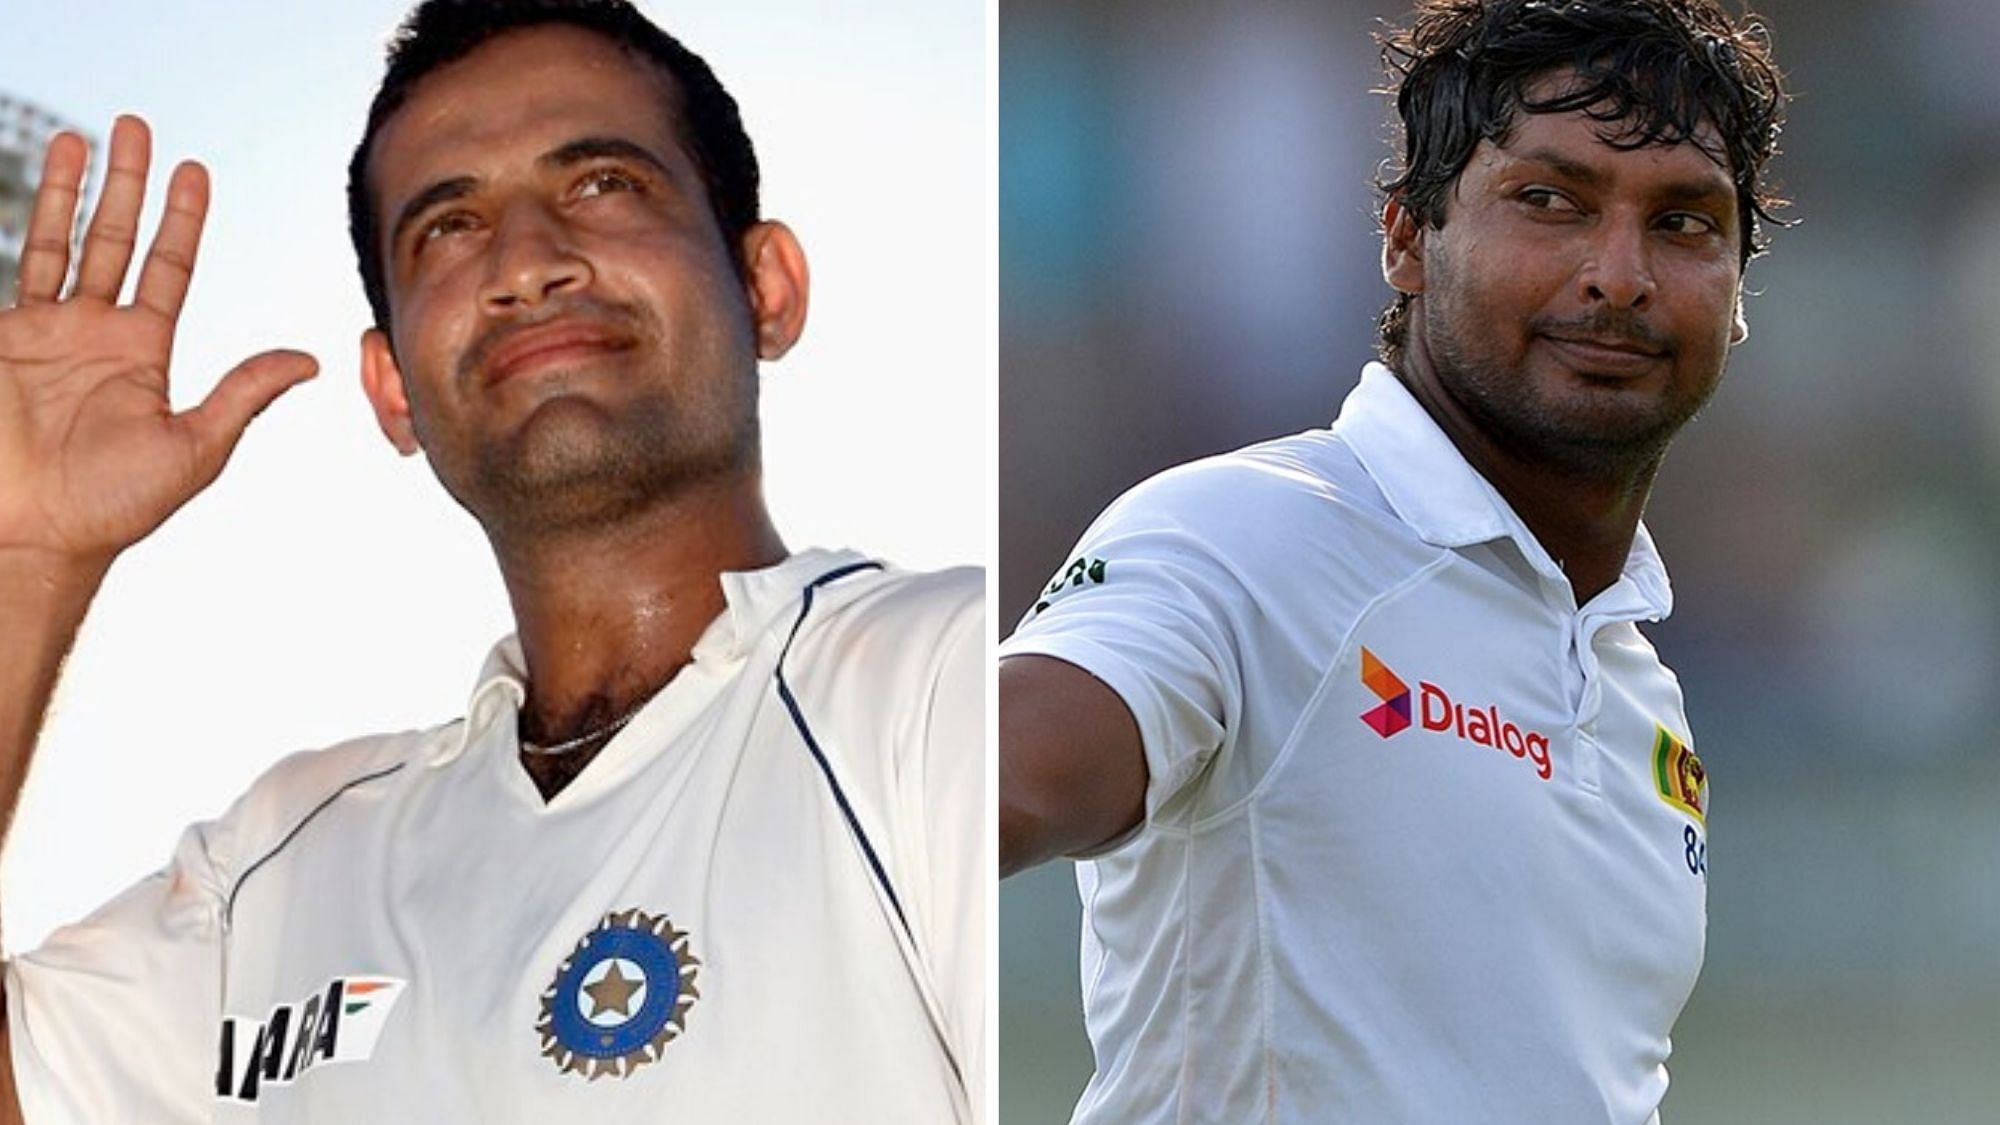 Irfan Pathan, who announced retirement from all forms of cricket on Saturday, 4 January revealed a ‘nasty’ exchange he had with the former Sri Lankan cricketer Kumar Sangakkara.